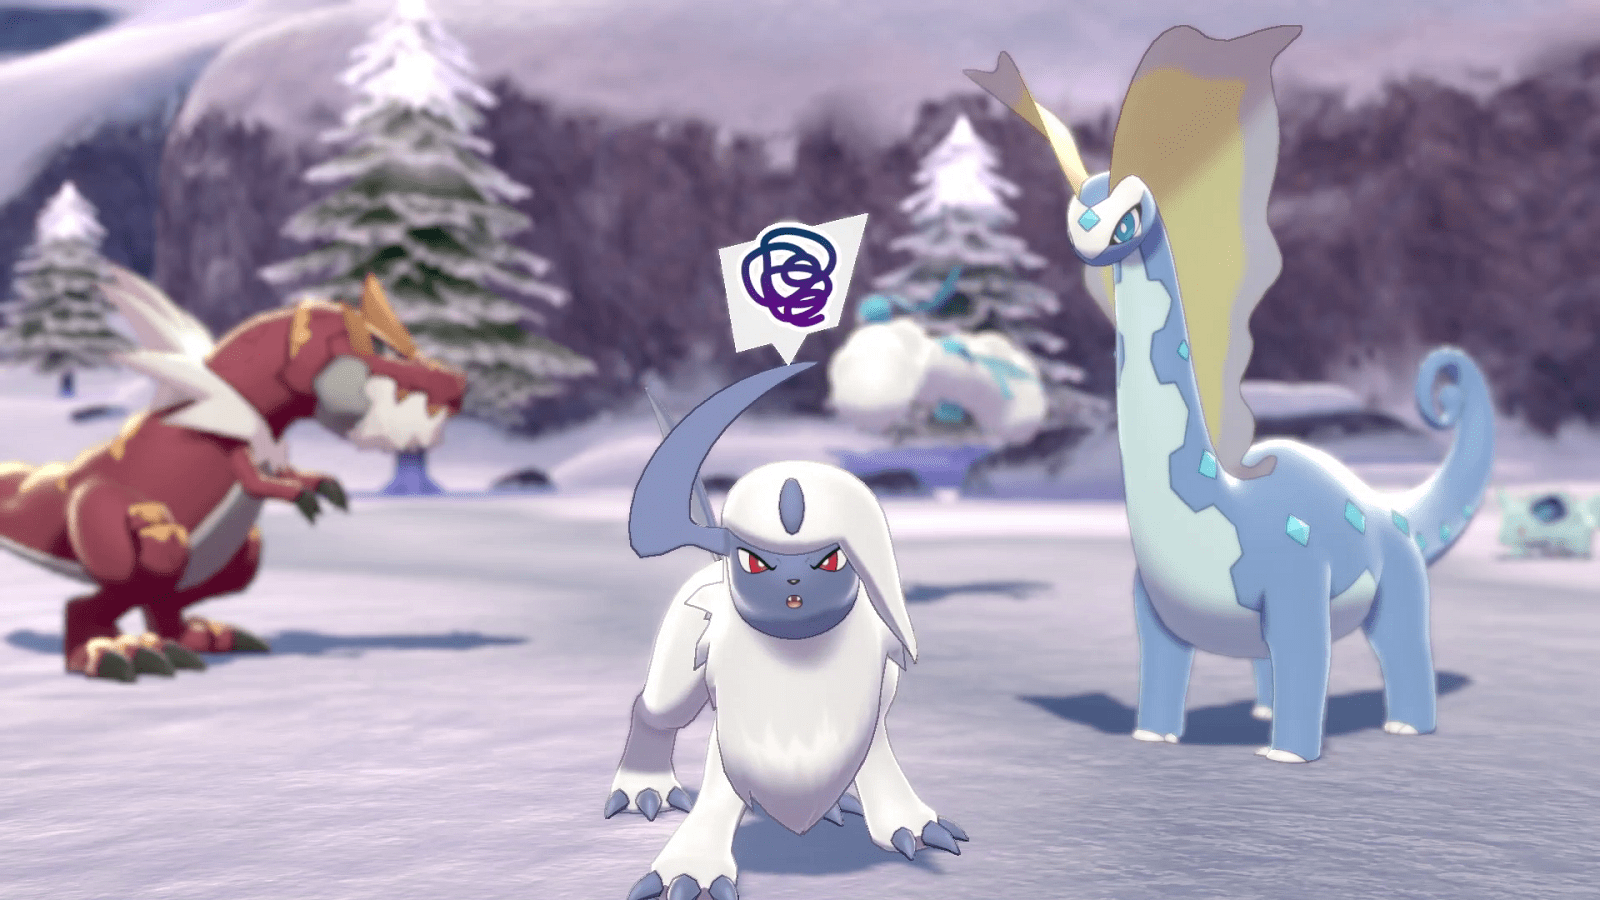 Pokemon The Crown Tundra DLC preview: four big additions in Sword